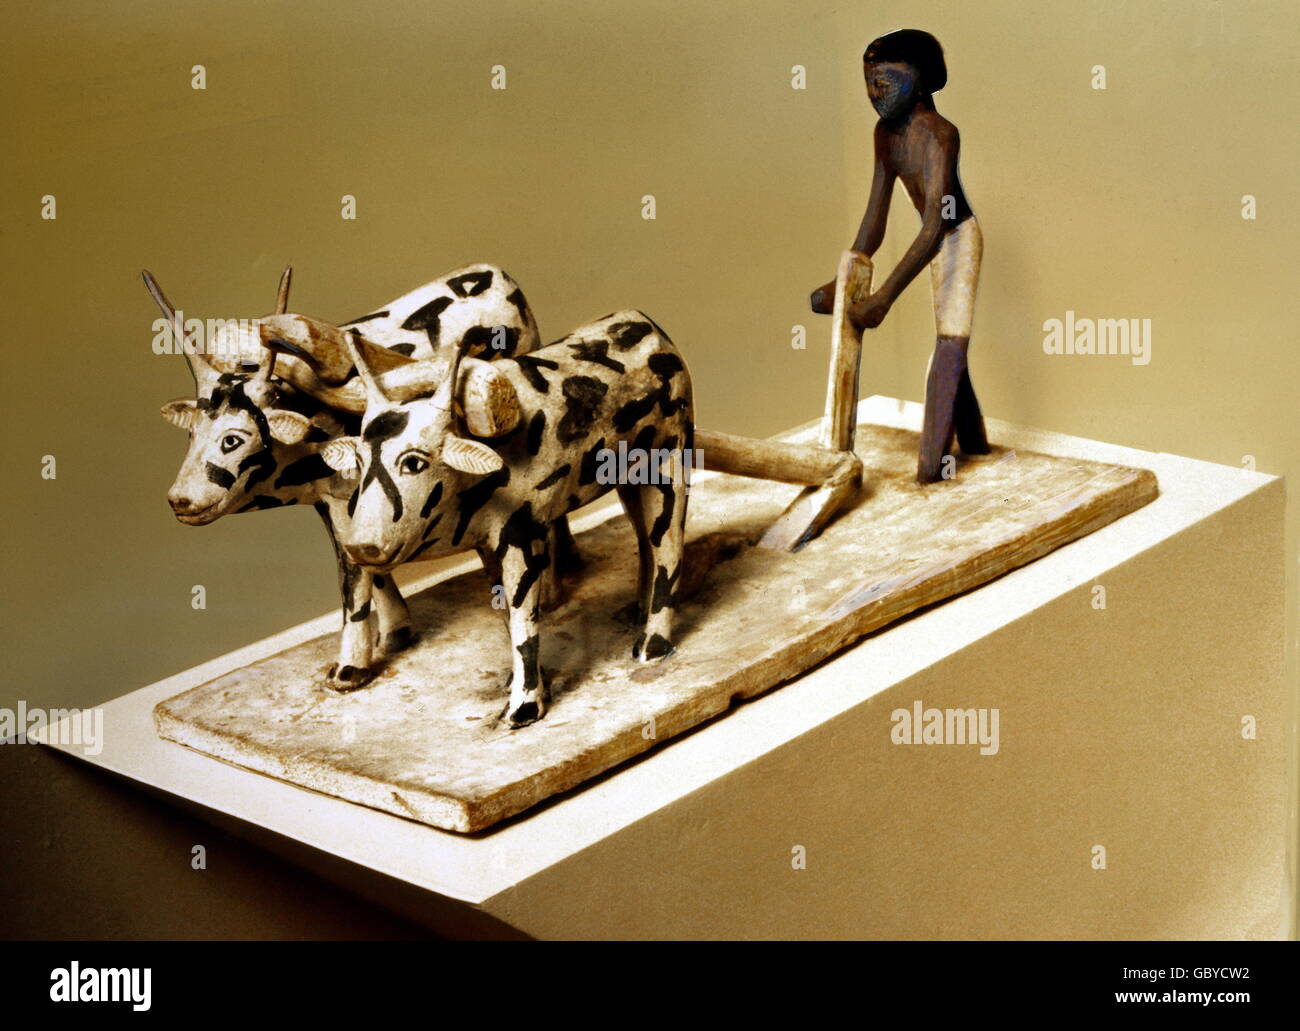 geography / travel, Egypt, agriculture, farmer with ox plough, wooden  sculpture, circa 2000 BC, burial object, Middle Kingdom of Egypt, British  Museum, London, funerary object, plow , ploughs, plows, yoke oxen to